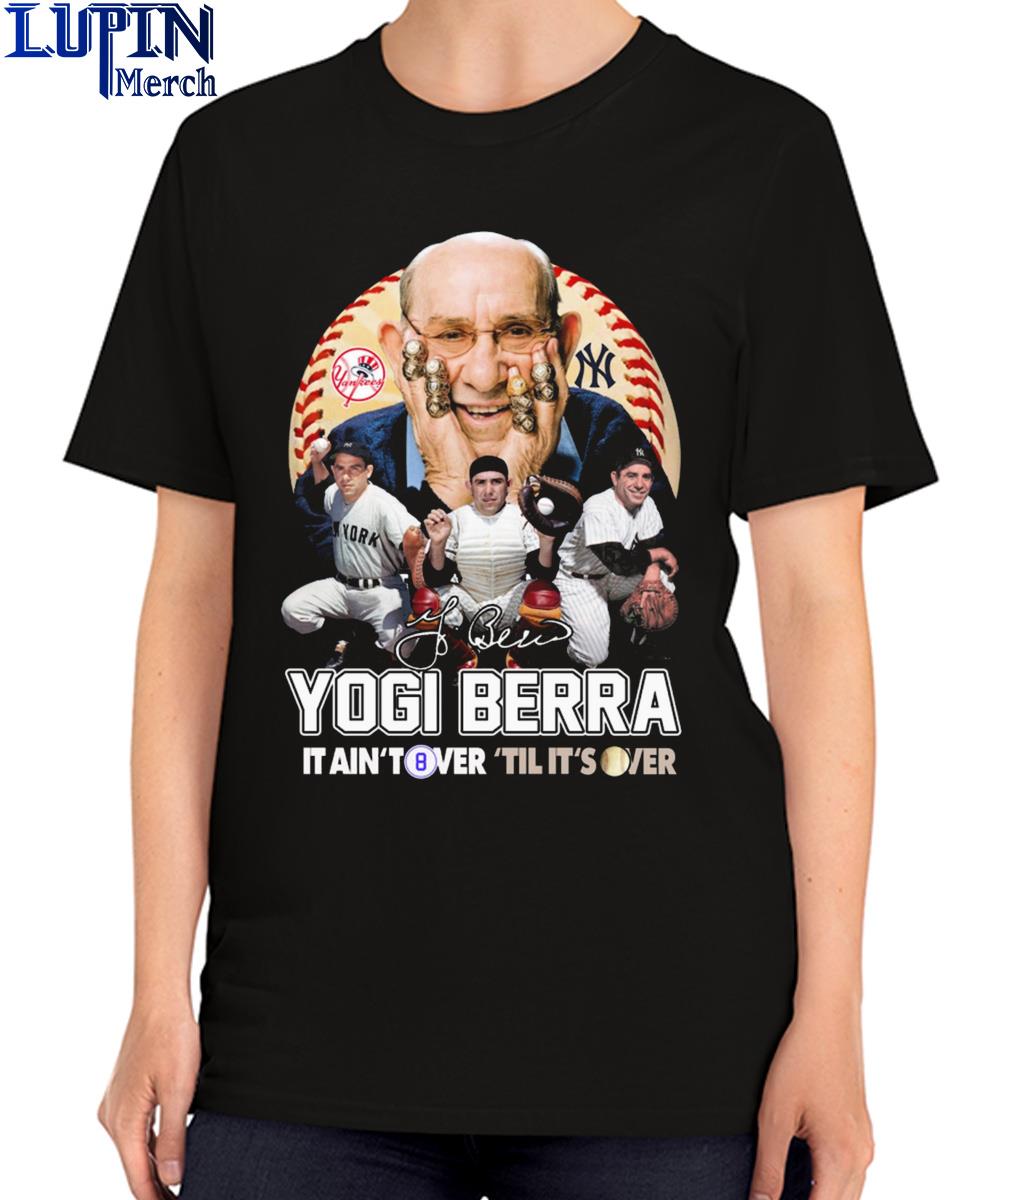 Official official Yogi Berra It ain't over till it's over